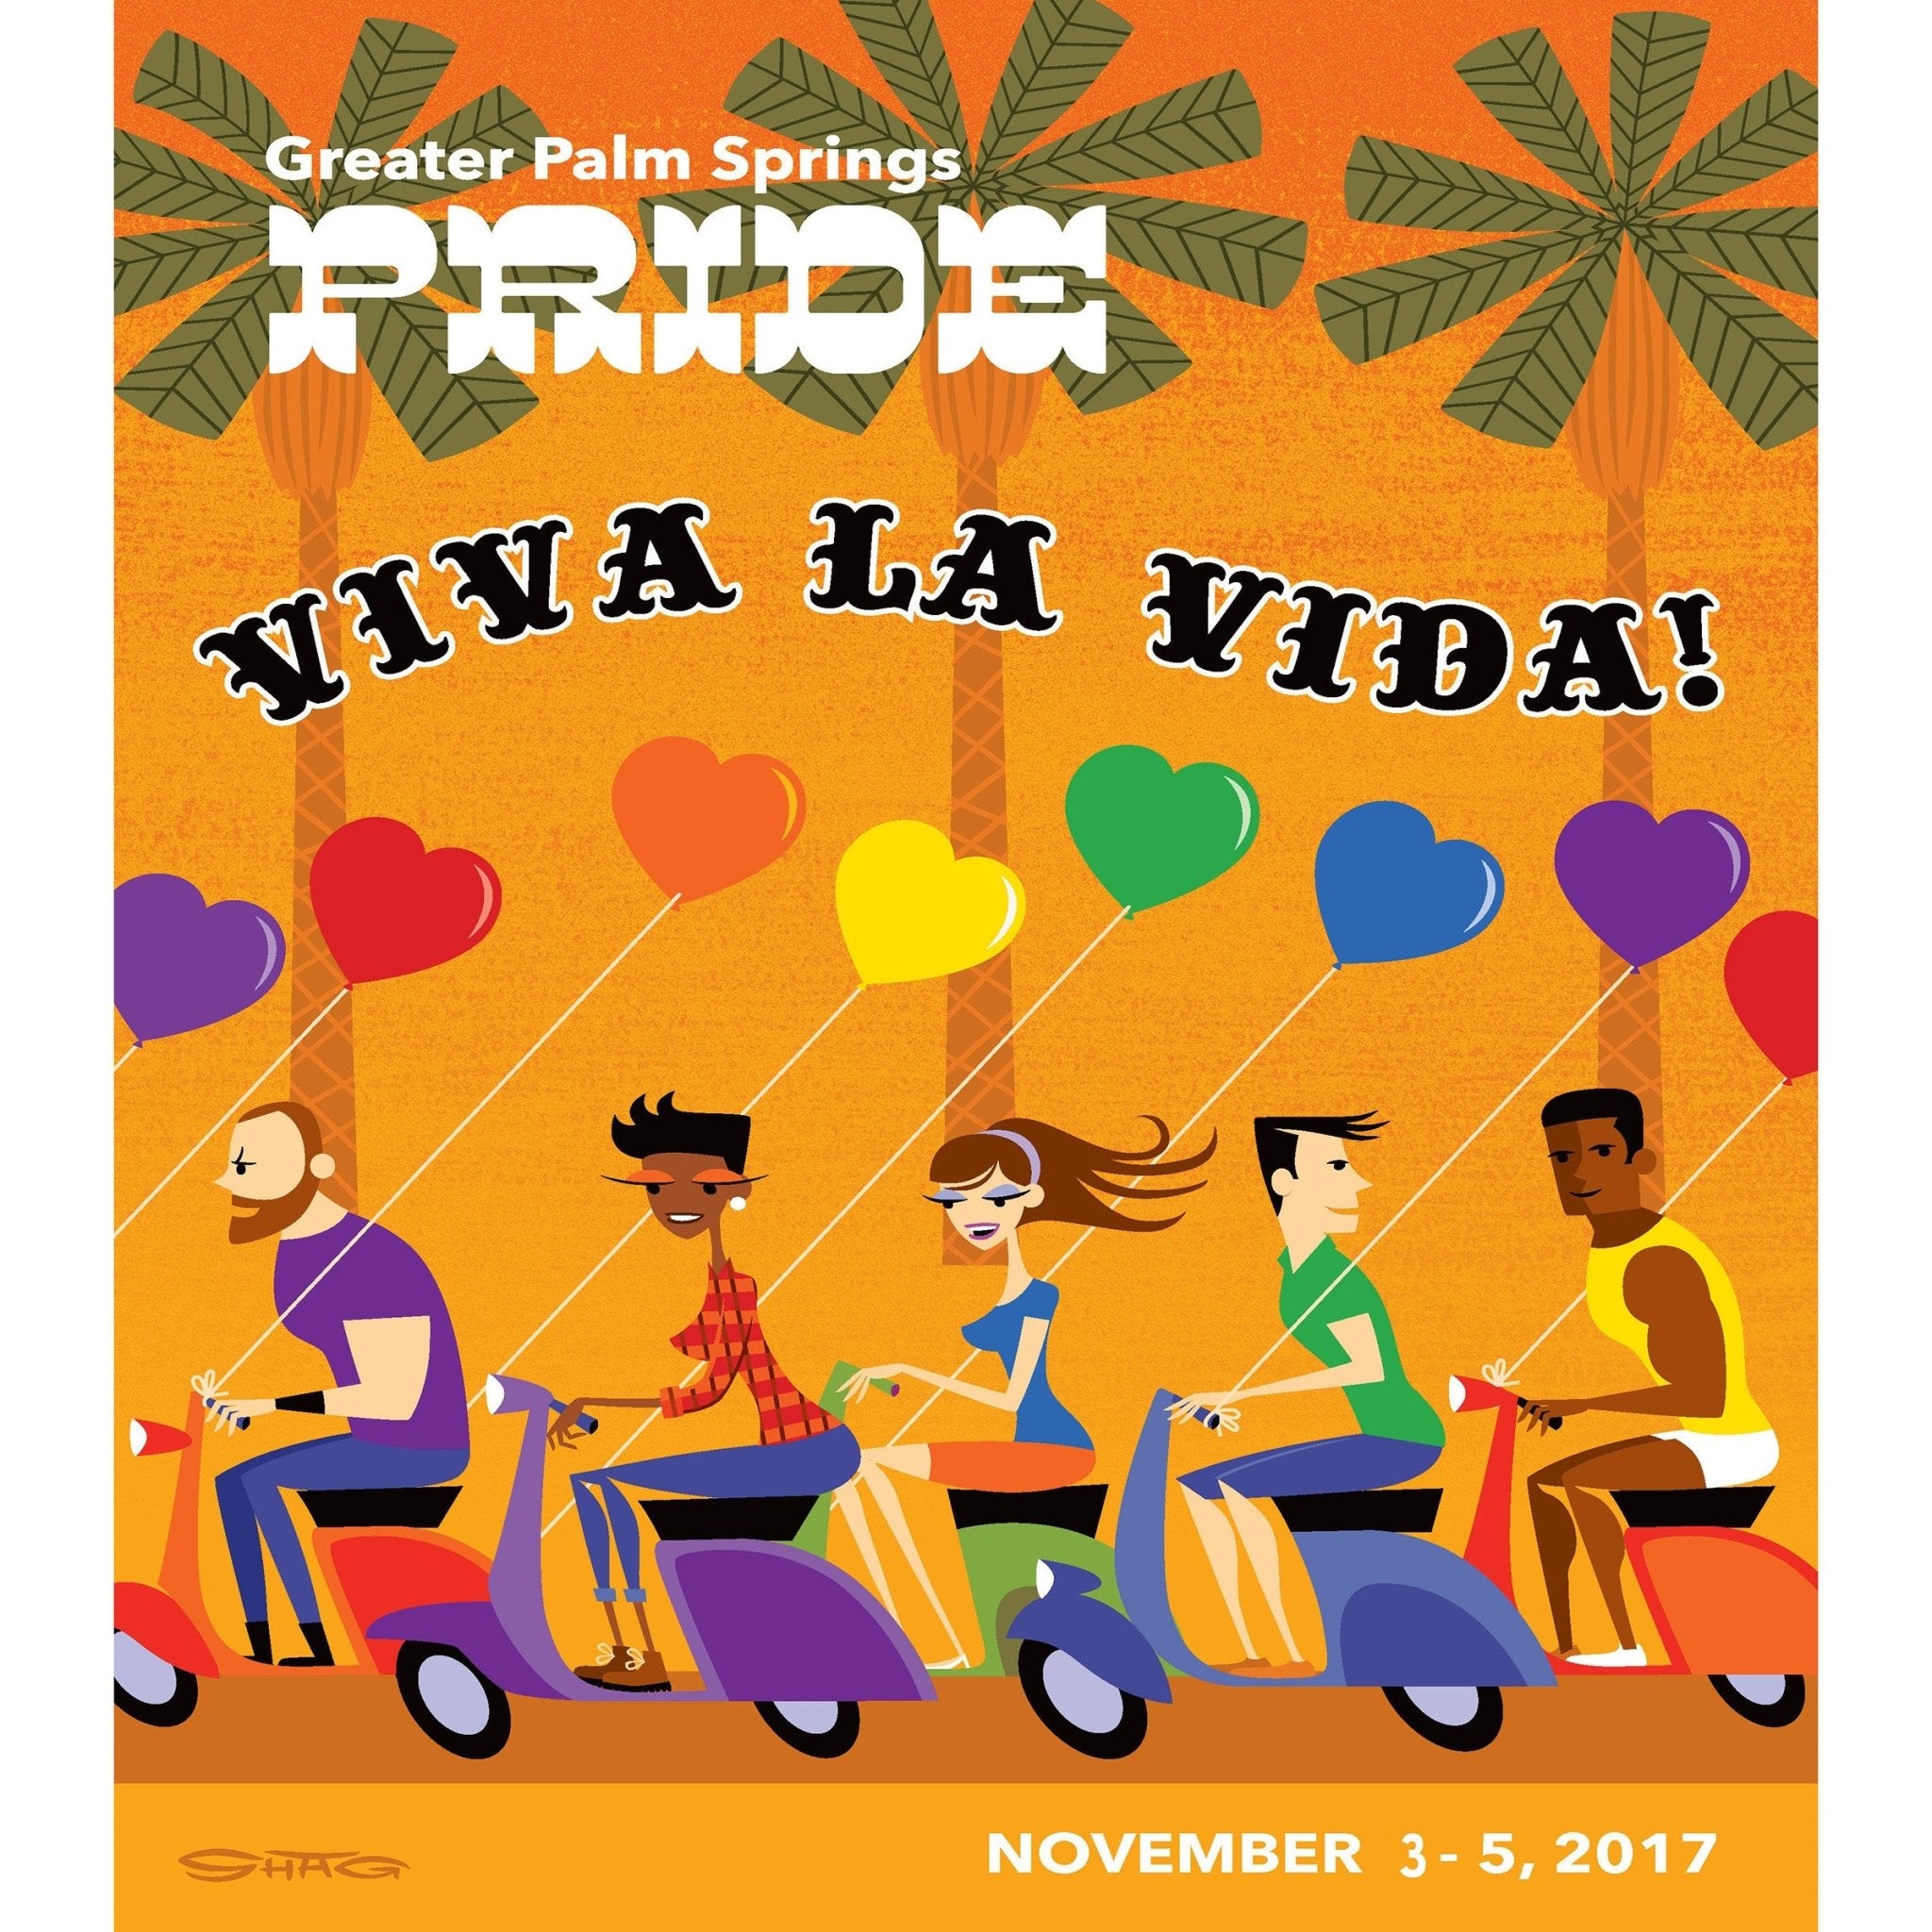 2017 Greater Palm Springs Pride Official Poster by Shag - Destination PSP